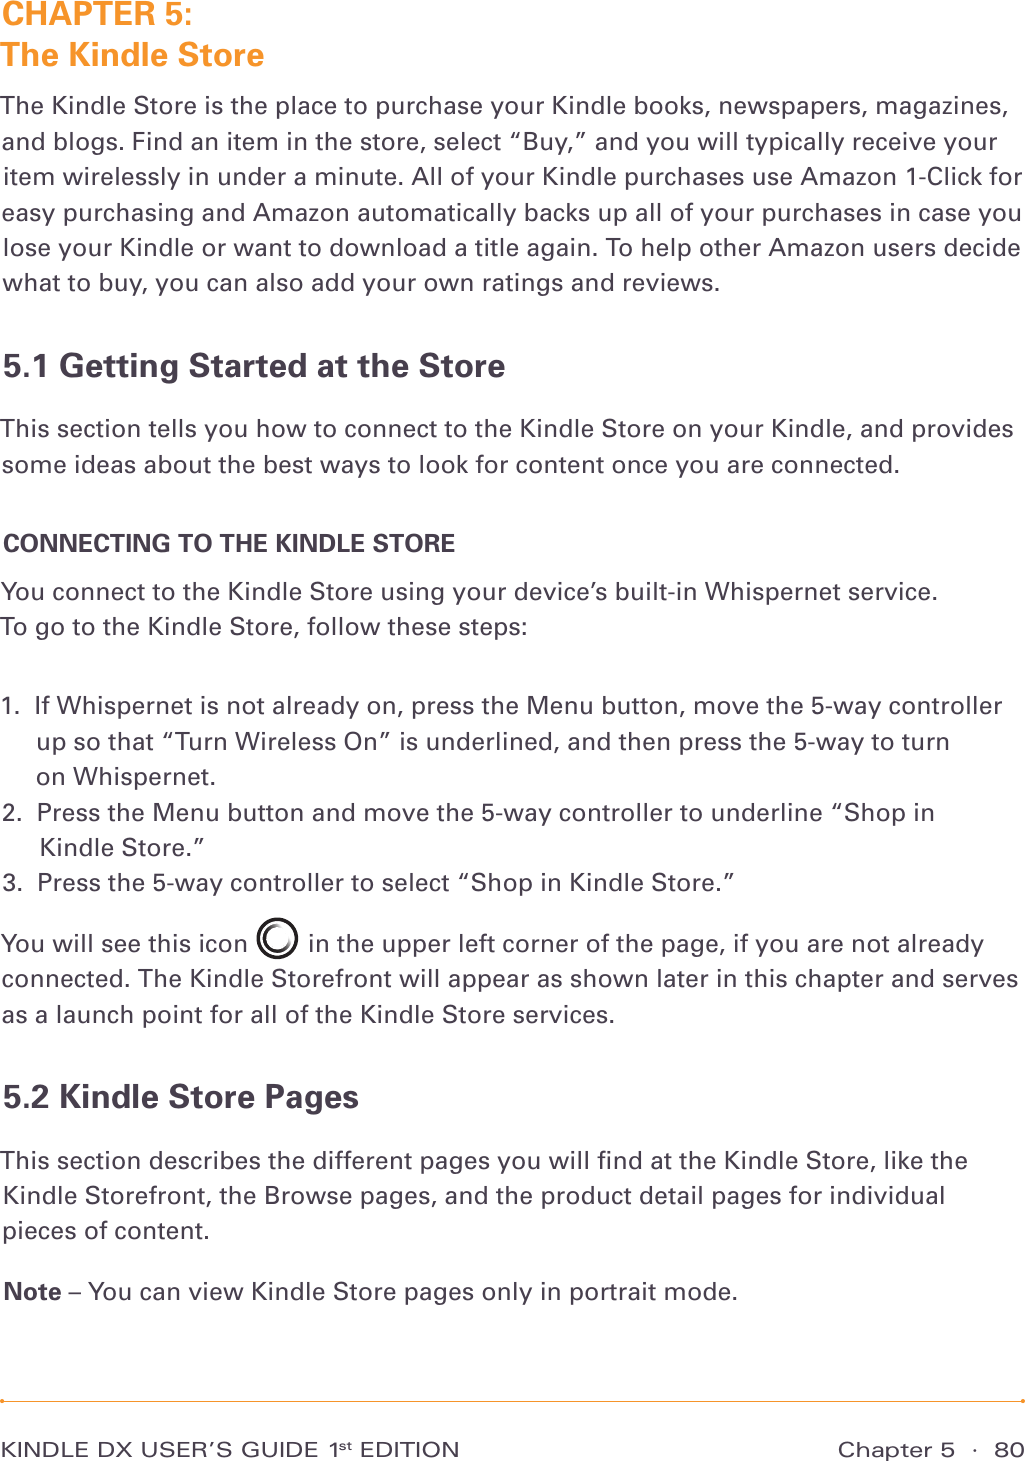 Chapter 5  ·  80KINDLE DX USER’S GUIDE 1st EDITIONCHAPTER 5:  The Kindle StoreThe Kindle Store is the place to purchase your Kindle books, newspapers, magazines, and blogs. Find an item in the store, select “Buy,” and you will typically receive your item wirelessly in under a minute. All of your Kindle purchases use Amazon 1-Click for easy purchasing and Amazon automatically backs up all of your purchases in case you lose your Kindle or want to download a title again. To help other Amazon users decide what to buy, you can also add your own ratings and reviews.5.1 Getting Started at the StoreThis section tells you how to connect to the Kindle Store on your Kindle, and provides some ideas about the best ways to look for content once you are connected.CONNECTING TO THE KINDLE STOREYou connect to the Kindle Store using your device’s built-in Whispernet service.  To go to the Kindle Store, follow these steps:1.   If Whispernet is not already on, press the Menu button, move the 5-way controller up so that “Turn Wireless On” is underlined, and then press the 5-way to turn  on Whispernet. 2.   Press the Menu button and move the 5-way controller to underline “Shop in  Kindle Store.” 3.   Press the 5-way controller to select “Shop in Kindle Store.” You will see this icon   in the upper left corner of the page, if you are not already connected. The Kindle Storefront will appear as shown later in this chapter and serves as a launch point for all of the Kindle Store services.5.2 Kindle Store PagesThis section describes the different pages you will ﬁnd at the Kindle Store, like the Kindle Storefront, the Browse pages, and the product detail pages for individual pieces of content.Note – You can view Kindle Store pages only in portrait mode.